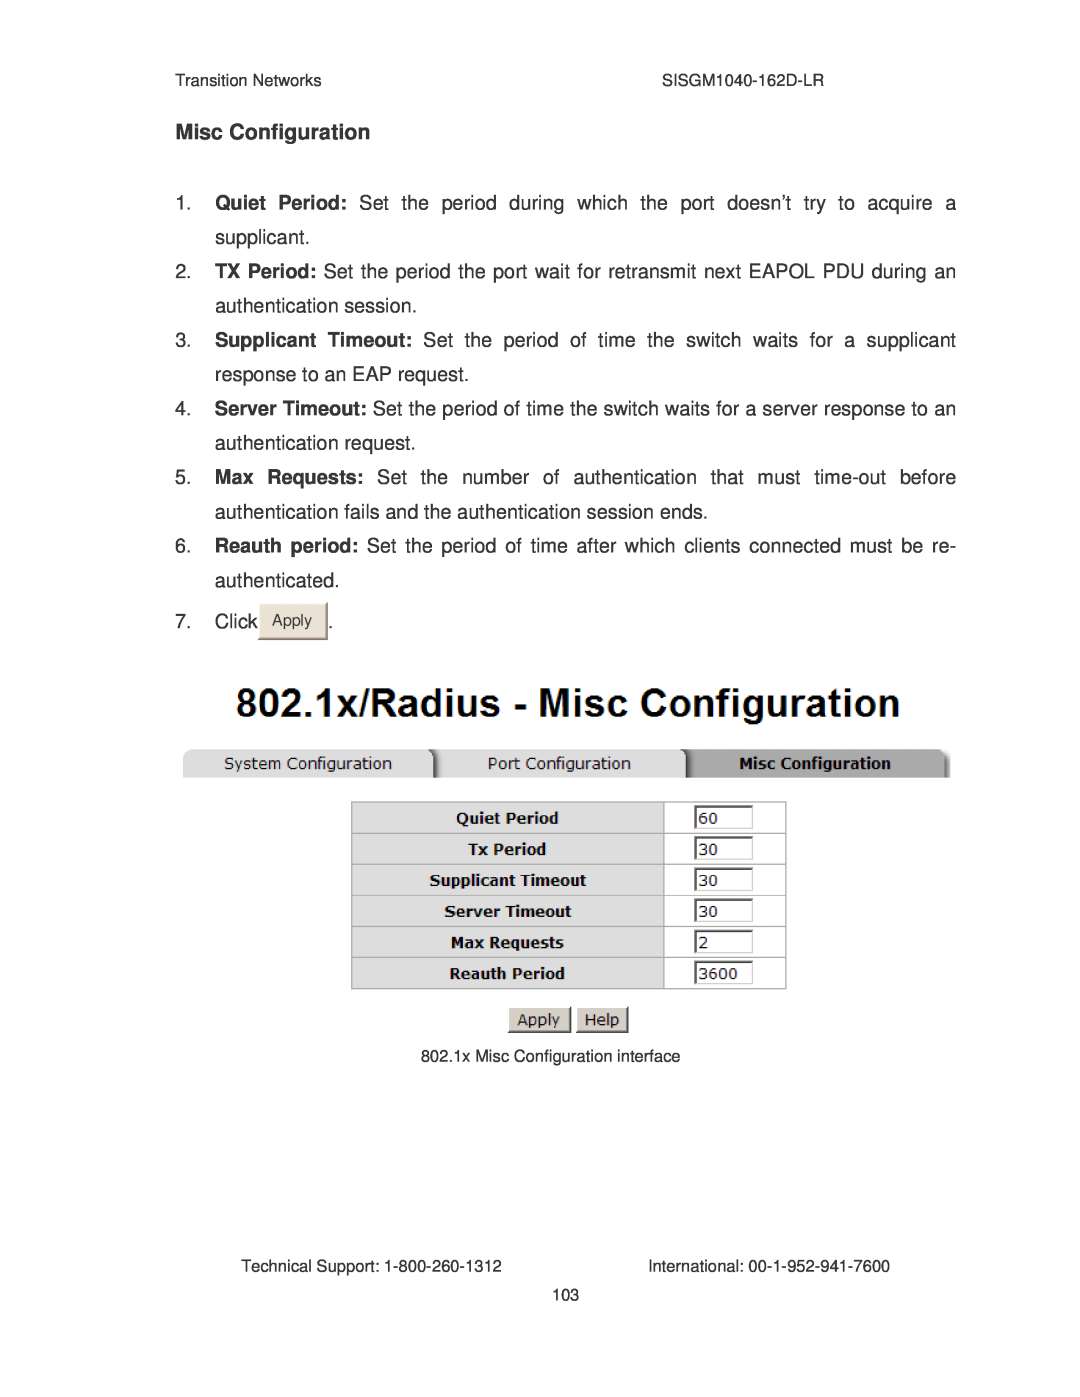 Transition Networks SISGM1040-162D manual Misc Configuration 